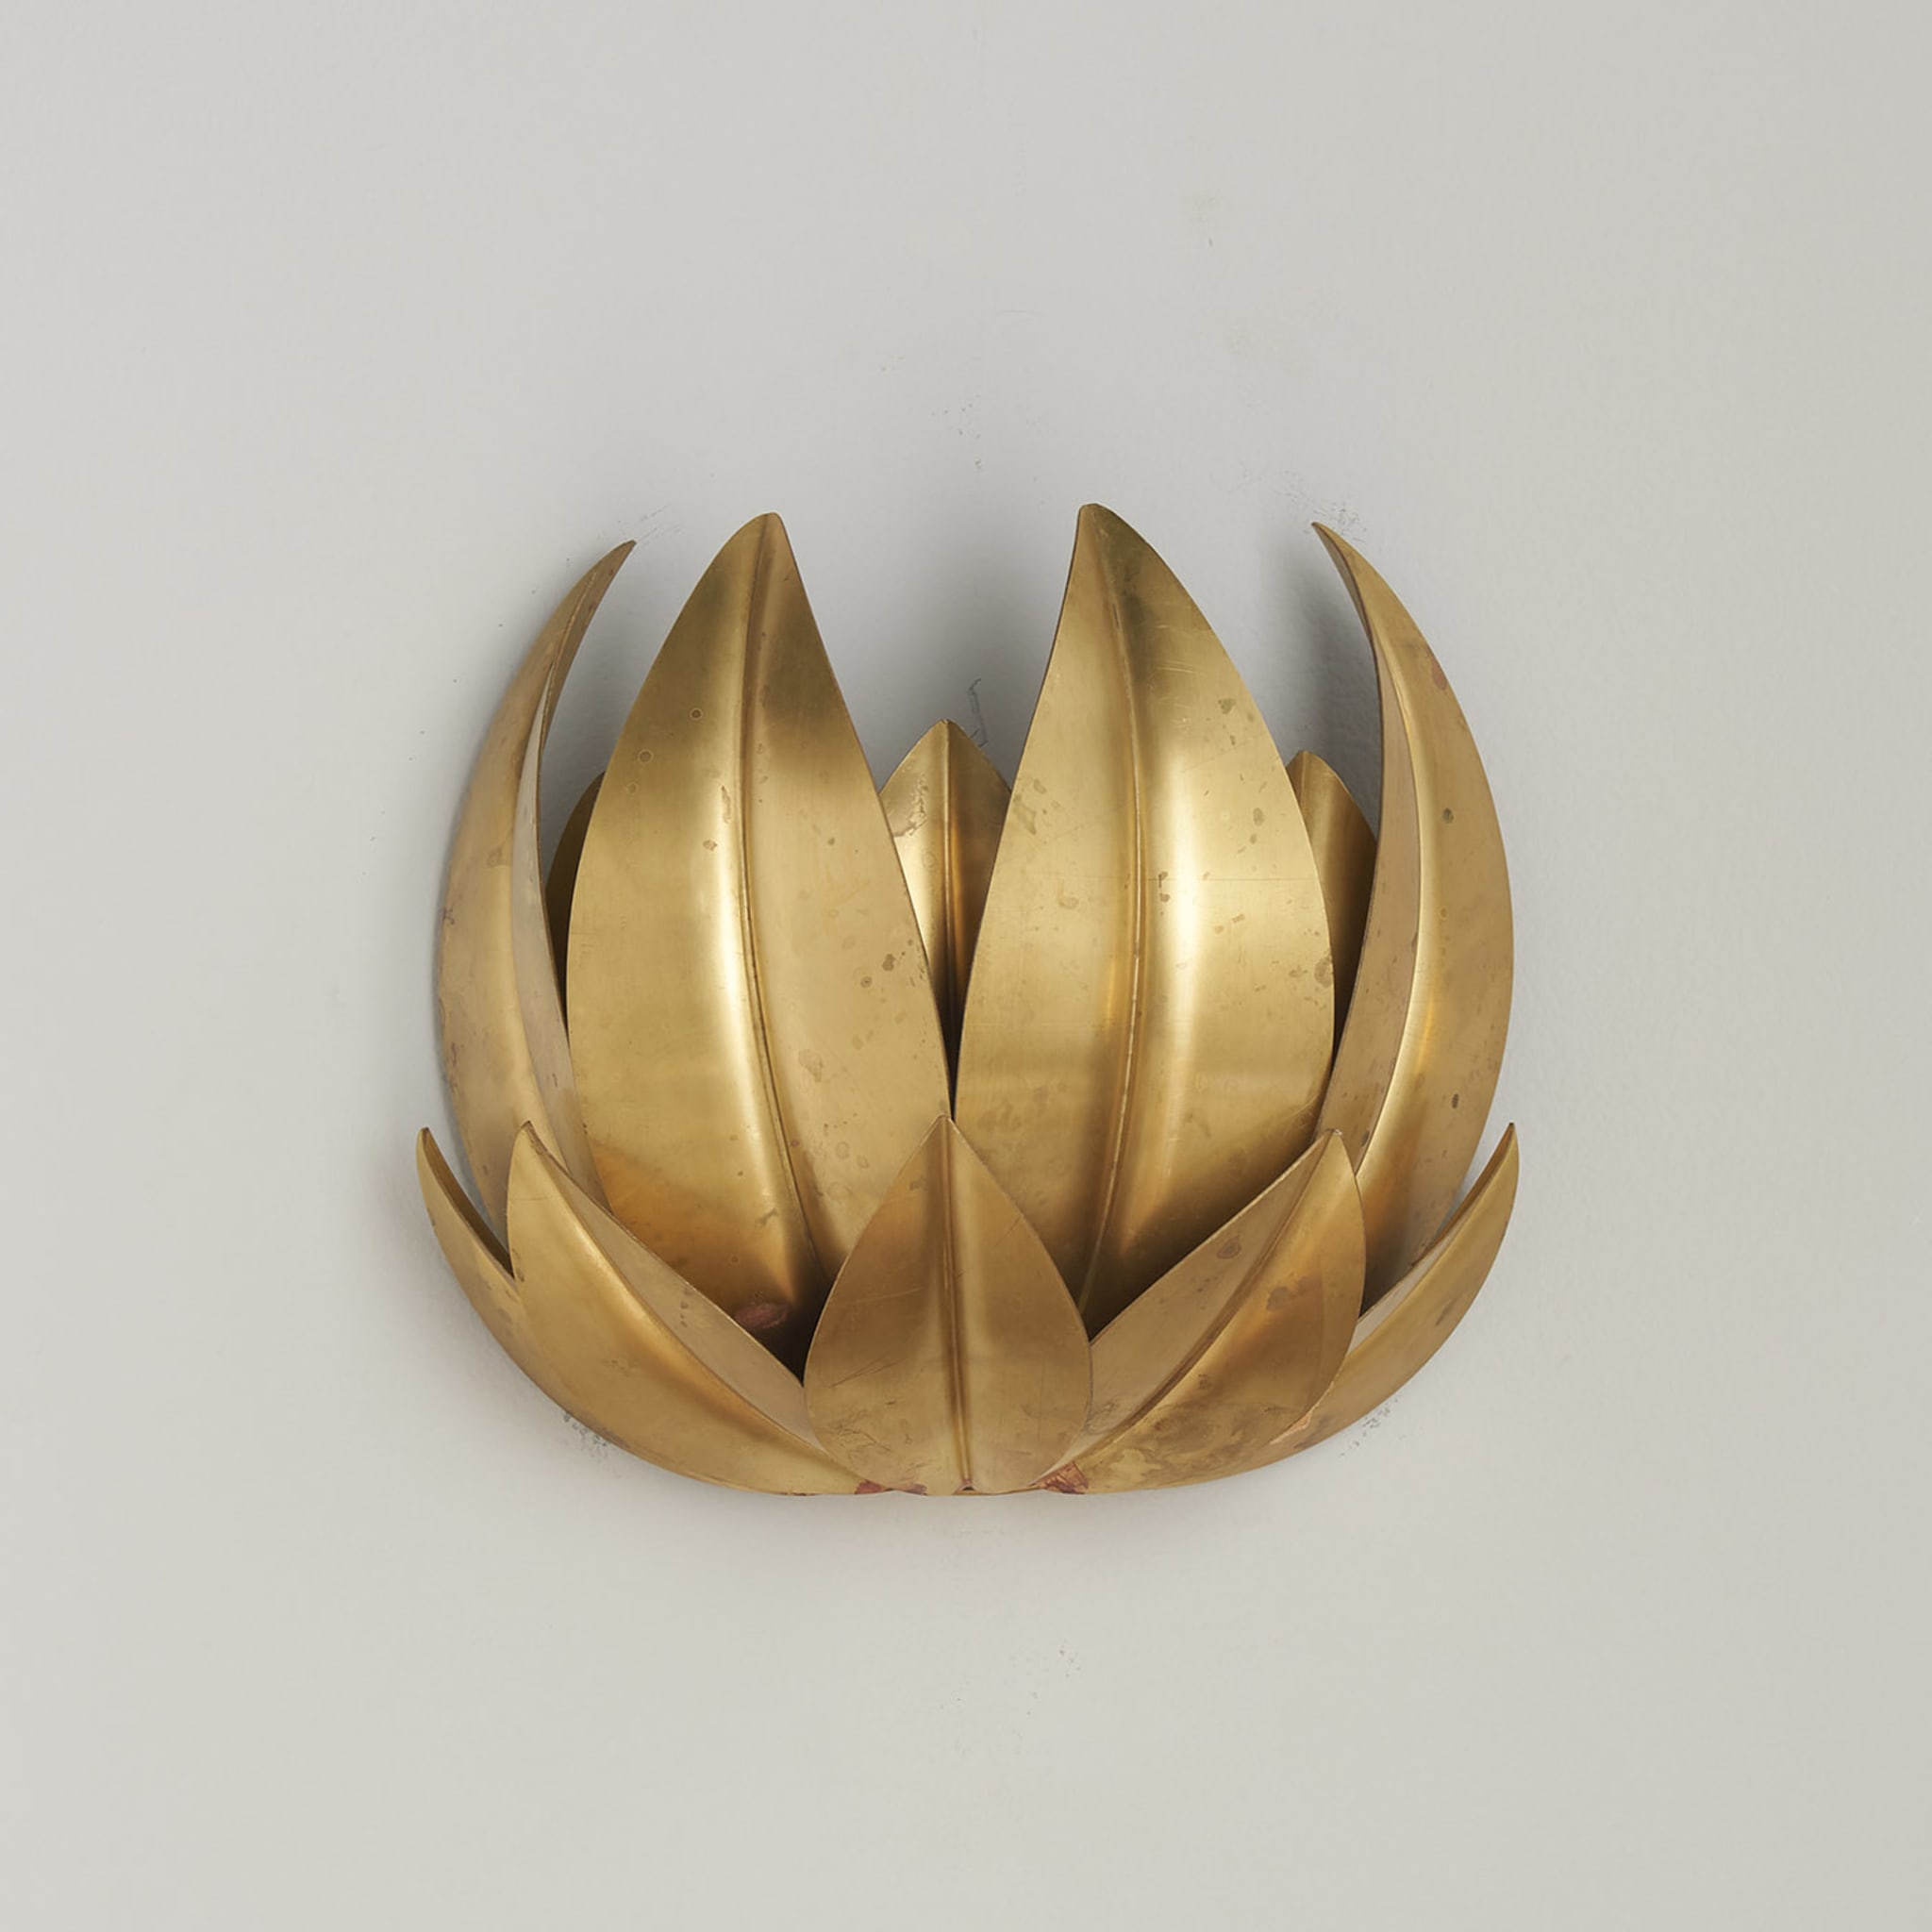 "Leaves" Wall Sconce in Antiquated Brass by Droulers Architecture - Alternative view 1